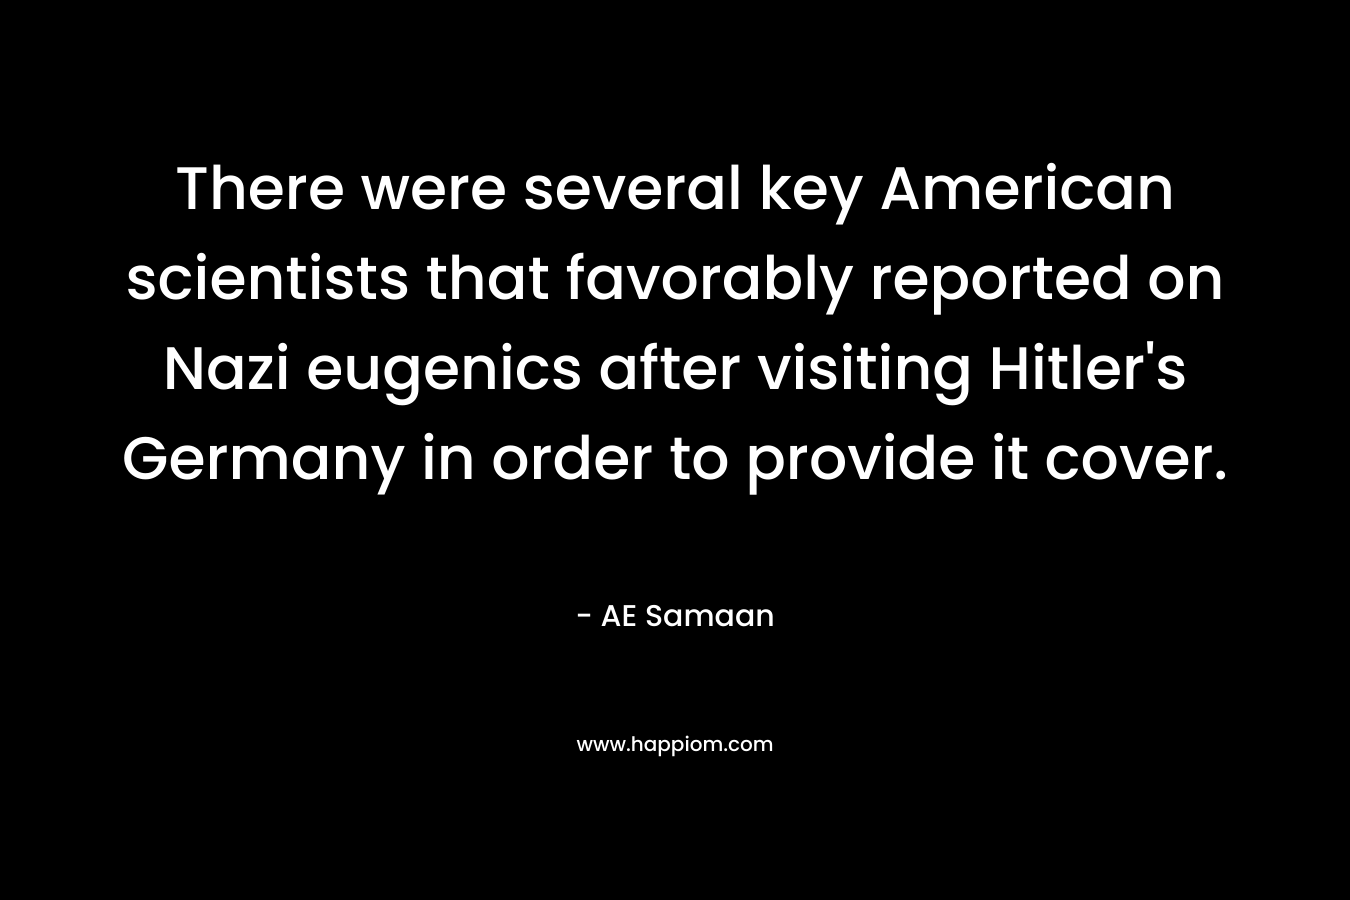 There were several key American scientists that favorably reported on Nazi eugenics after visiting Hitler’s Germany in order to provide it cover. – AE Samaan